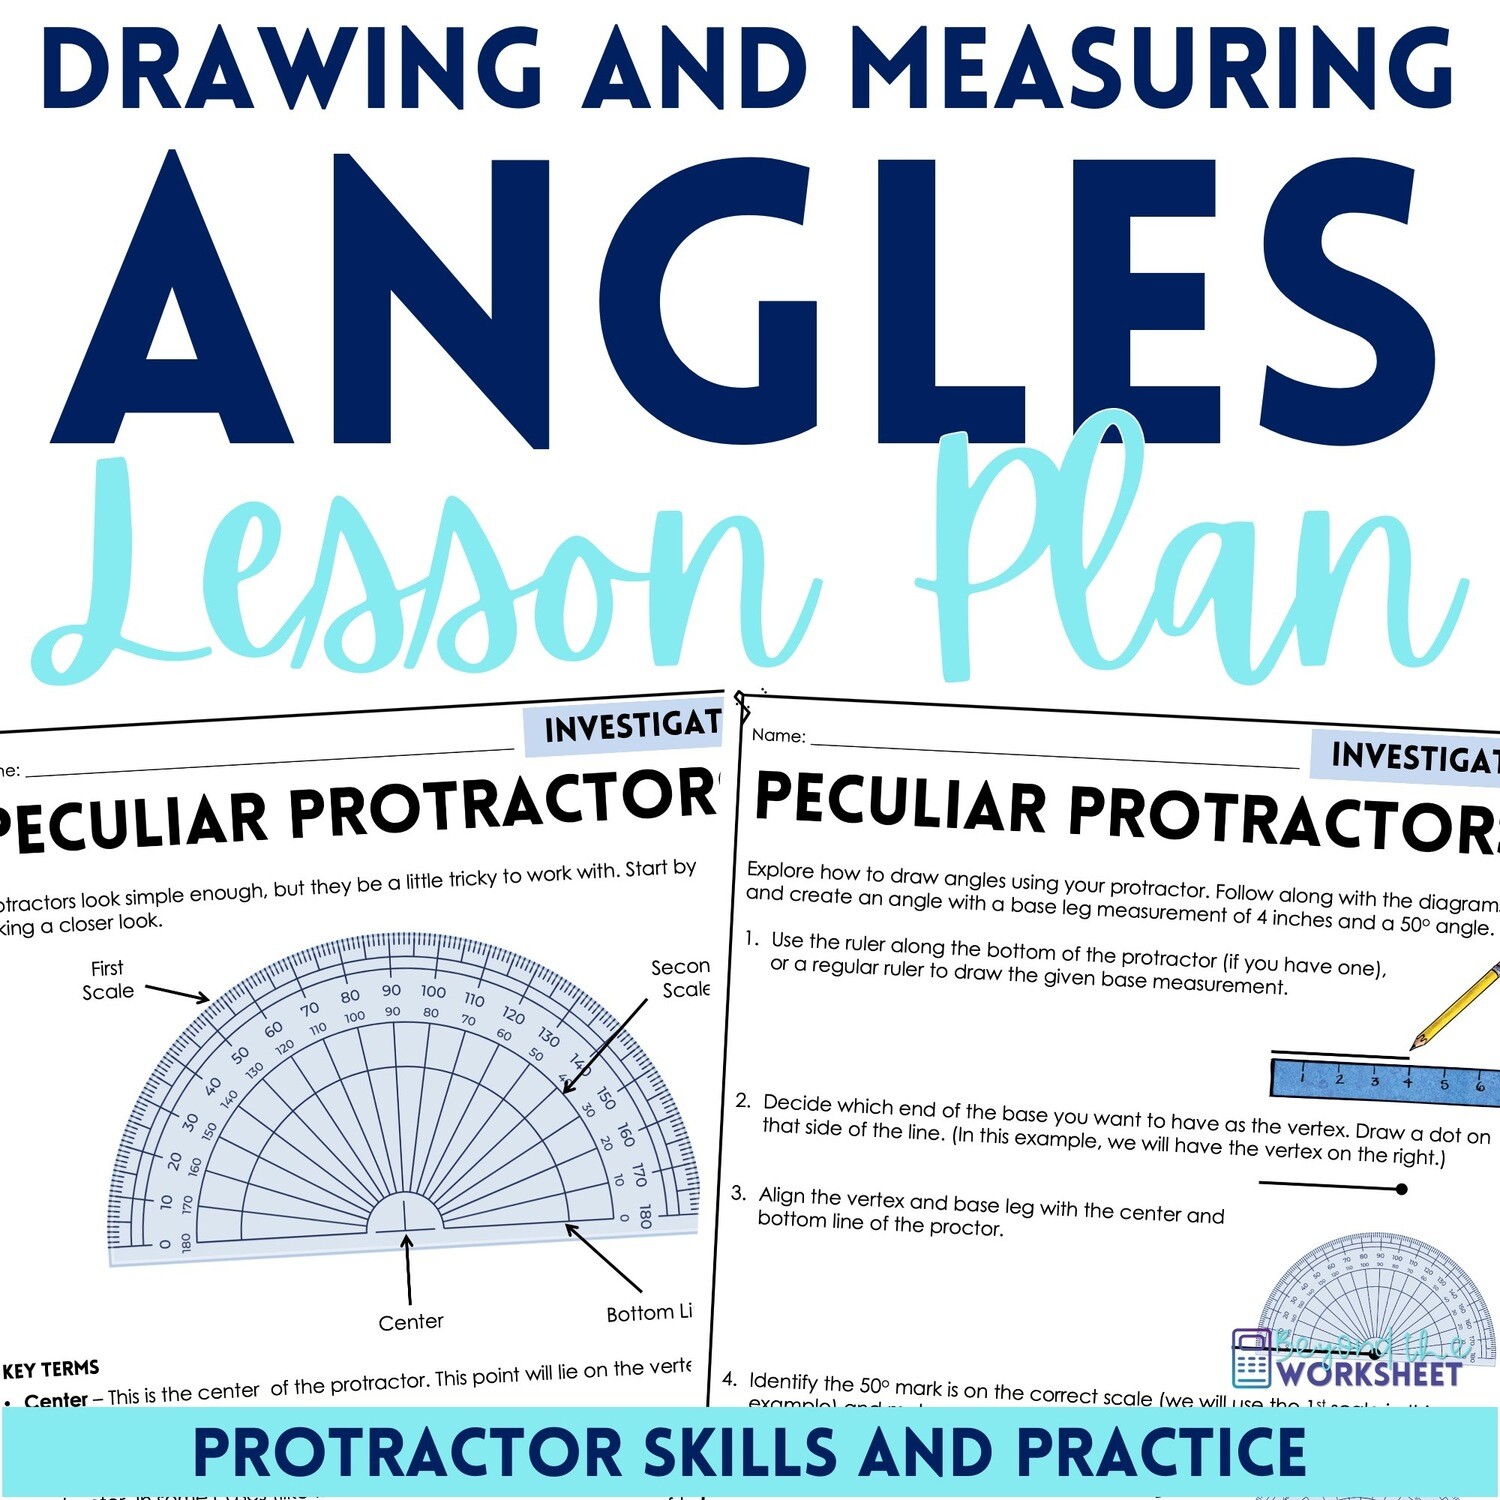 Drawing and Measuring Angles Lesson Plan